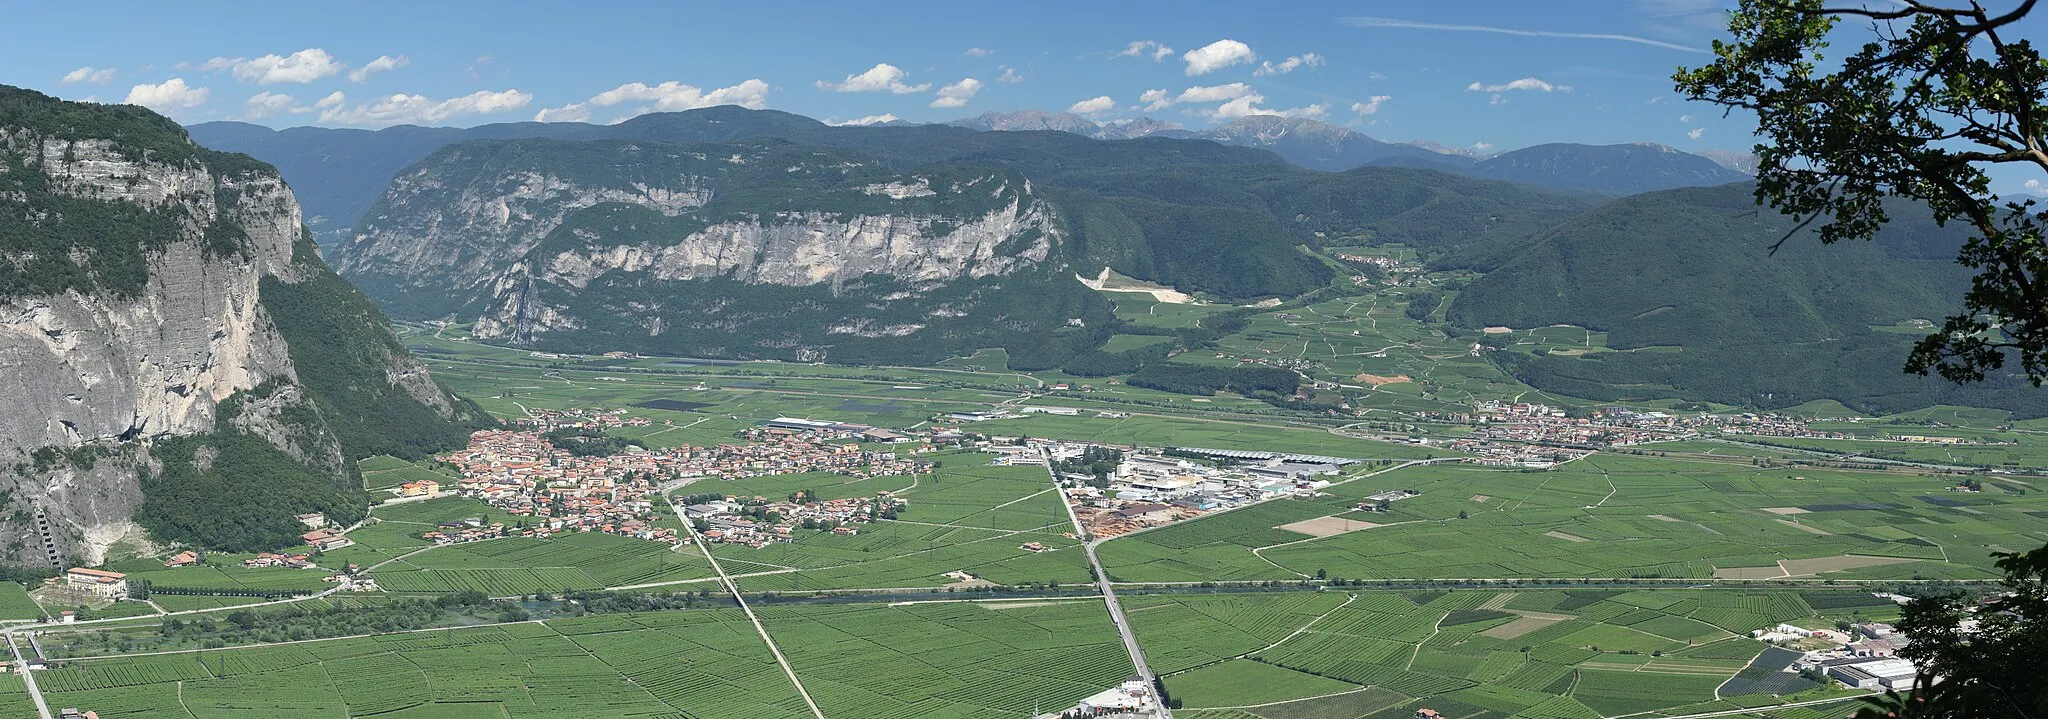 Photo showing: Mezzocorona (Italy): panoramic view of Mezzocorona, San Michele all'adige and Faedo from the panoramic point above Mezzolombardo (from west).
Rivers Noce (near the bottom) and Adige (in the middle) can be seen as well.